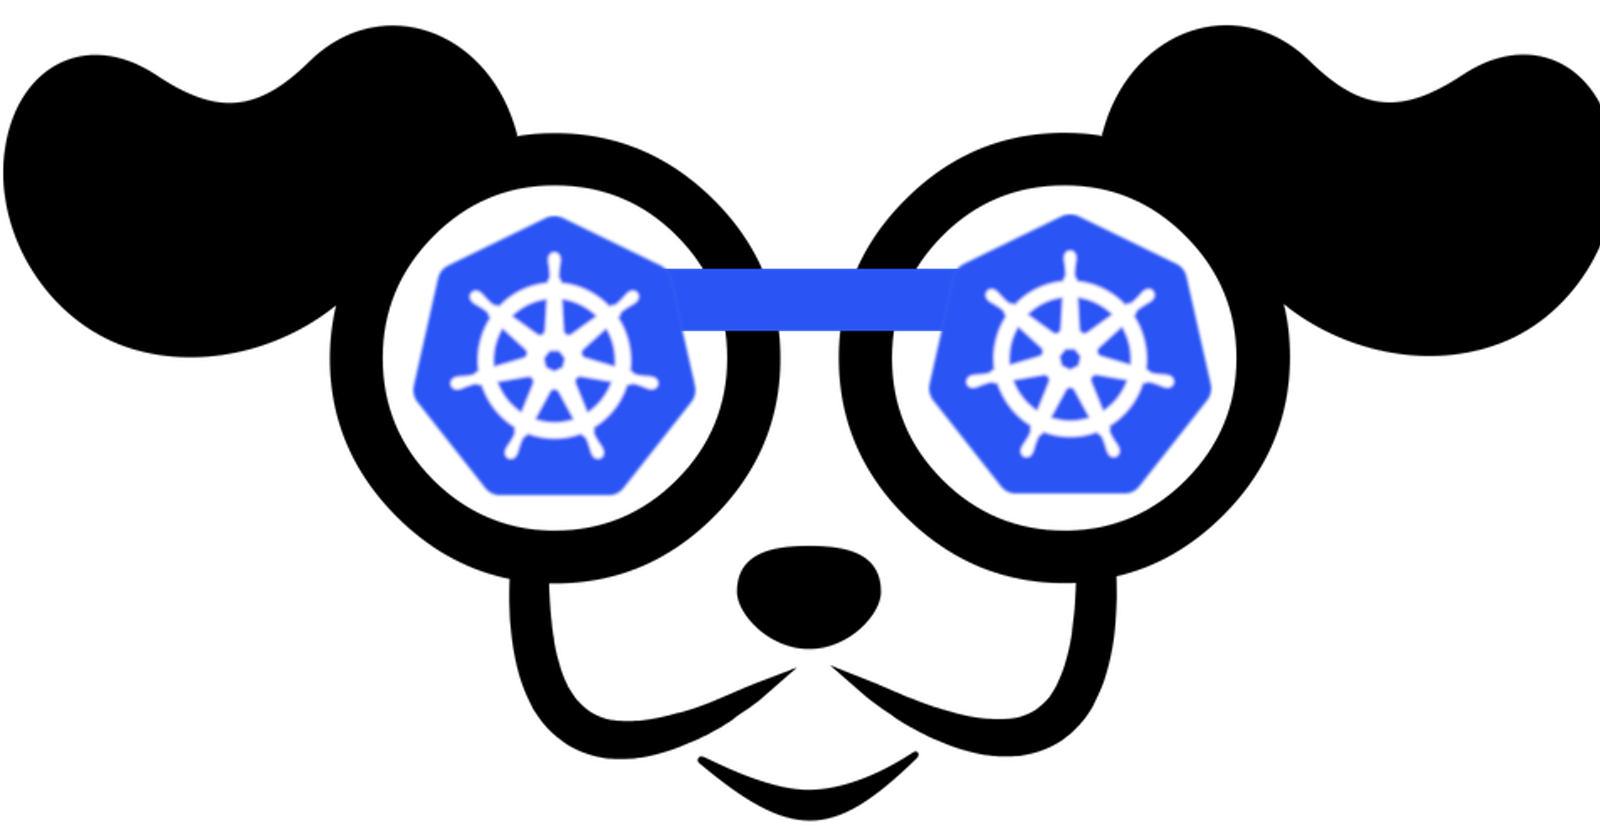 The Ultimate CLI to manage your Kubernetes Clusters